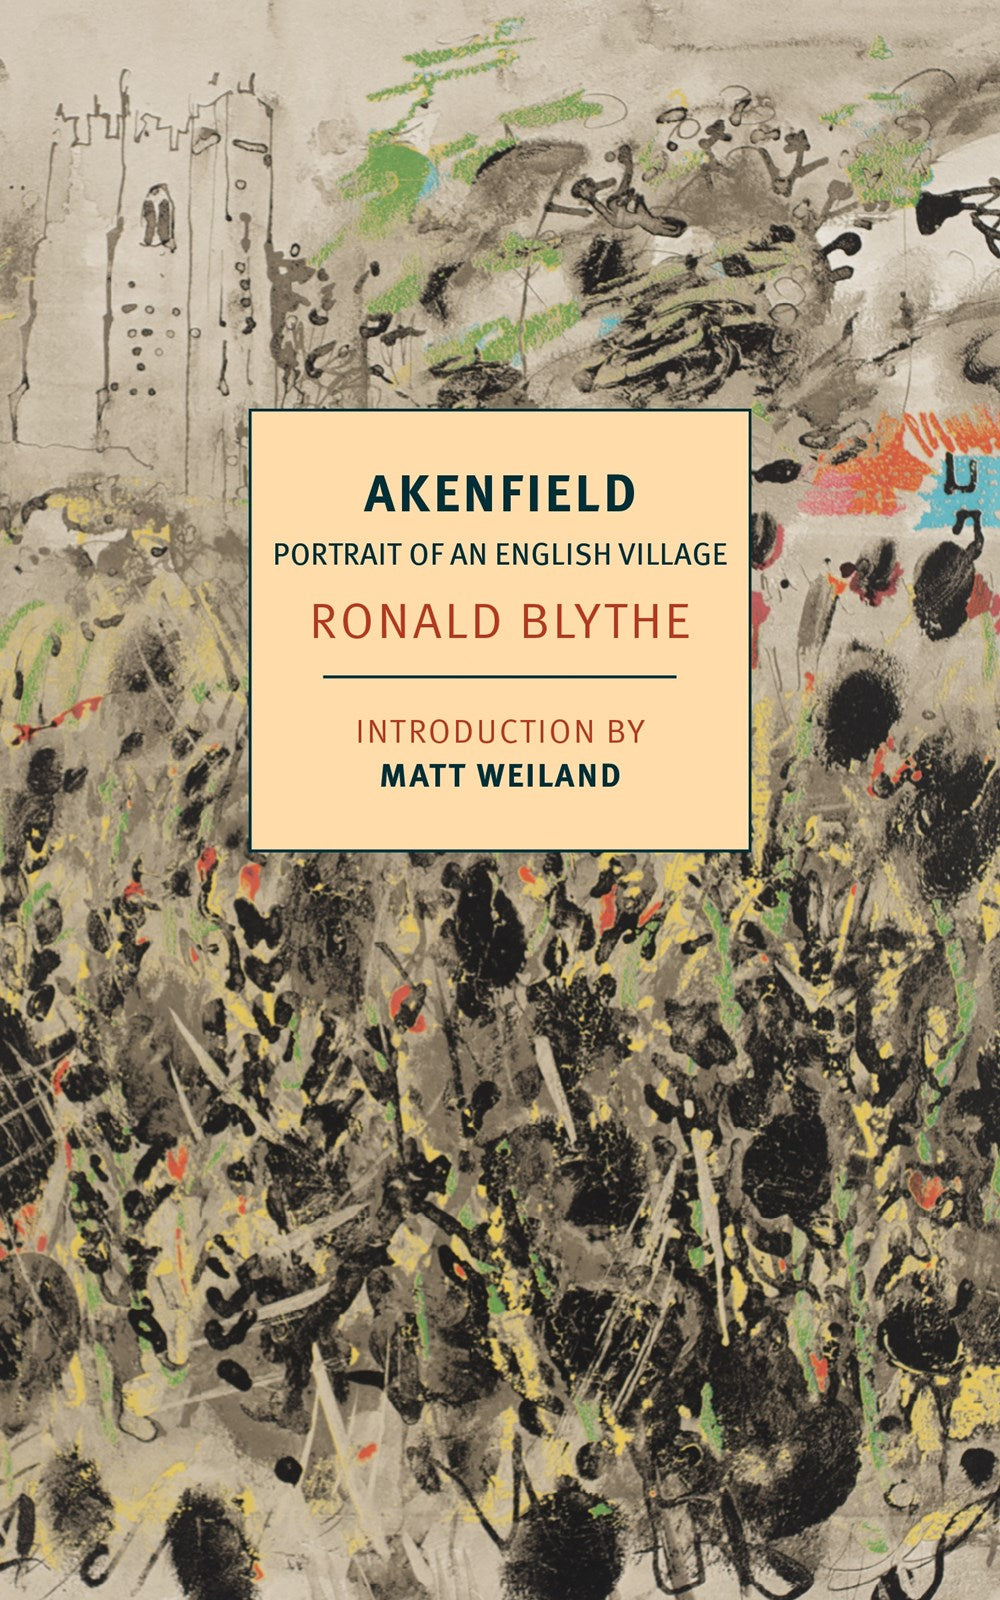 Akenfield: A Portrait of An English Village by Ronald Blythe (Introduction by Matt Weiland)